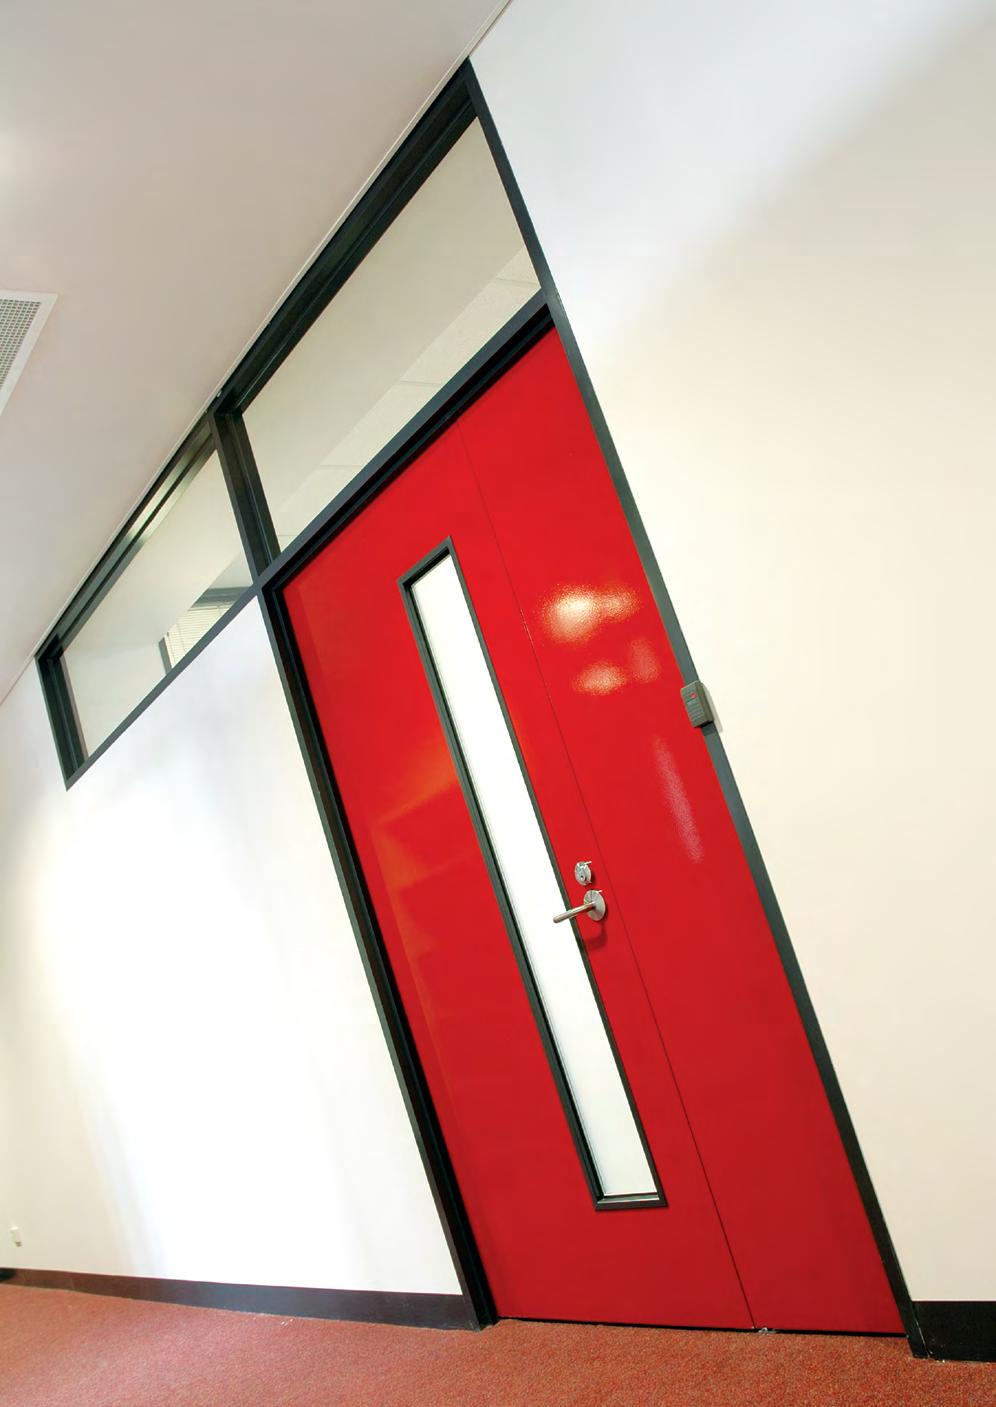 Opti-Lite Practicality in design. The Opti-Lite door vision panel is an innovative glazing concept.